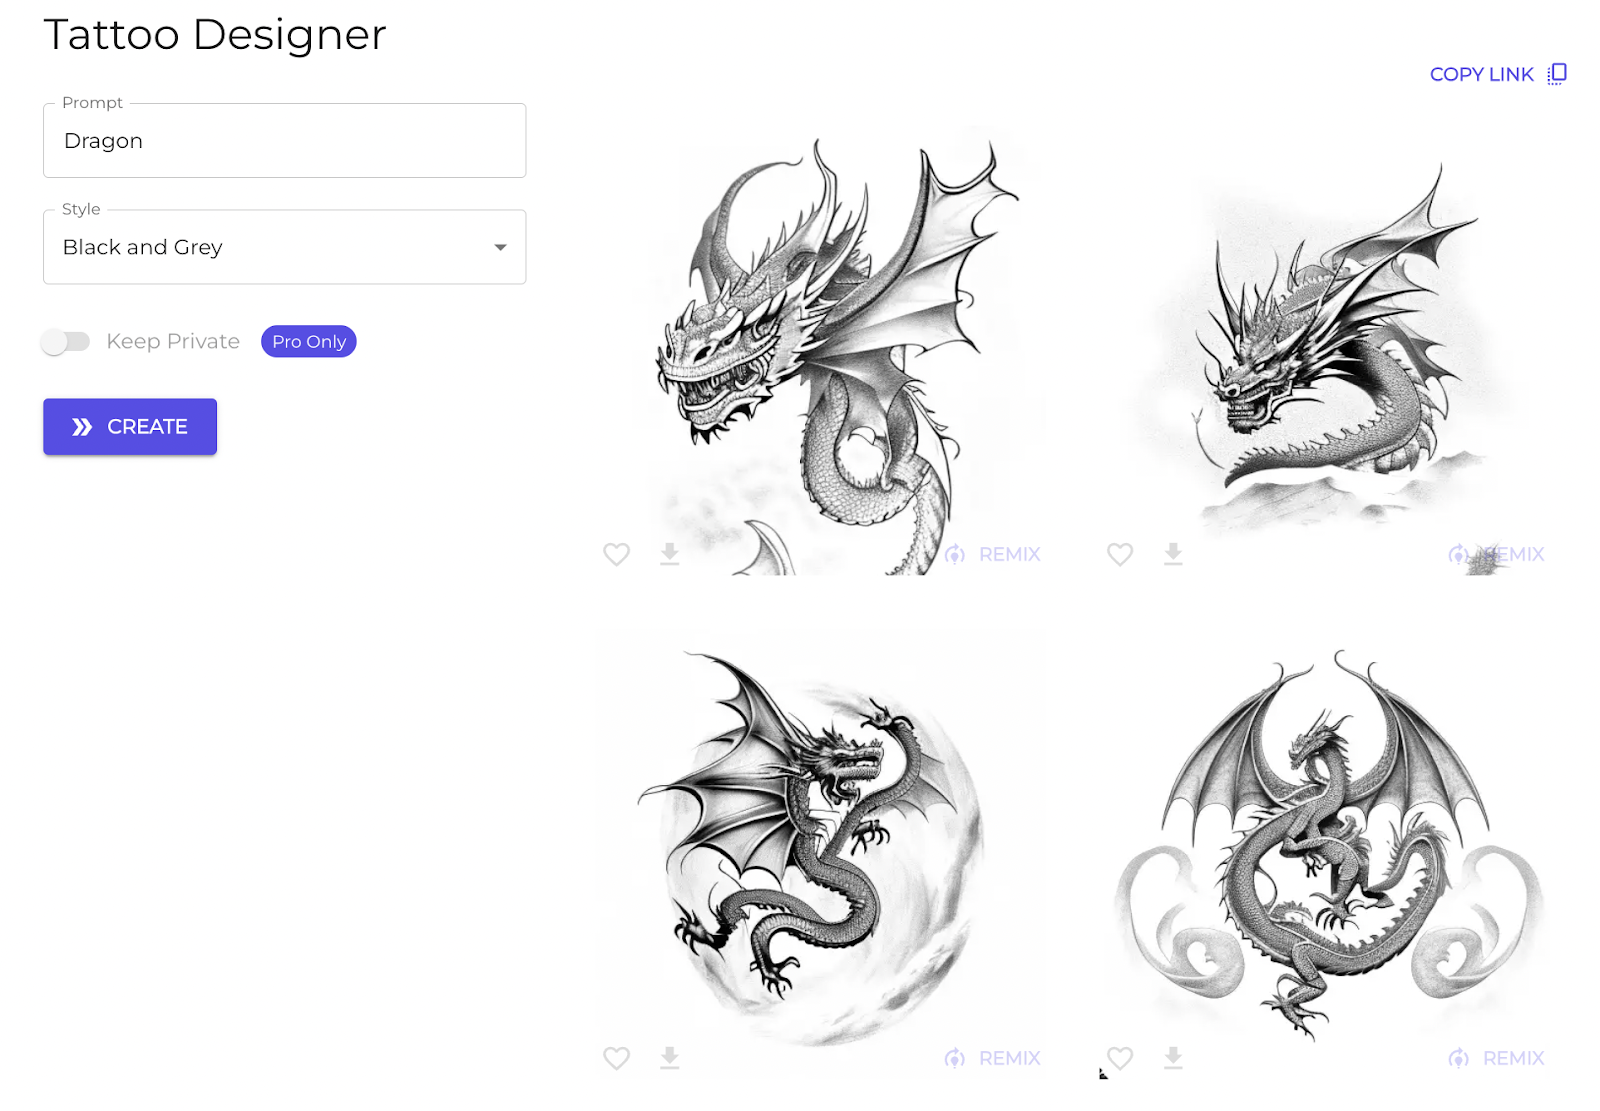 4 Dragons tattoo designs are shown as per the prompt.